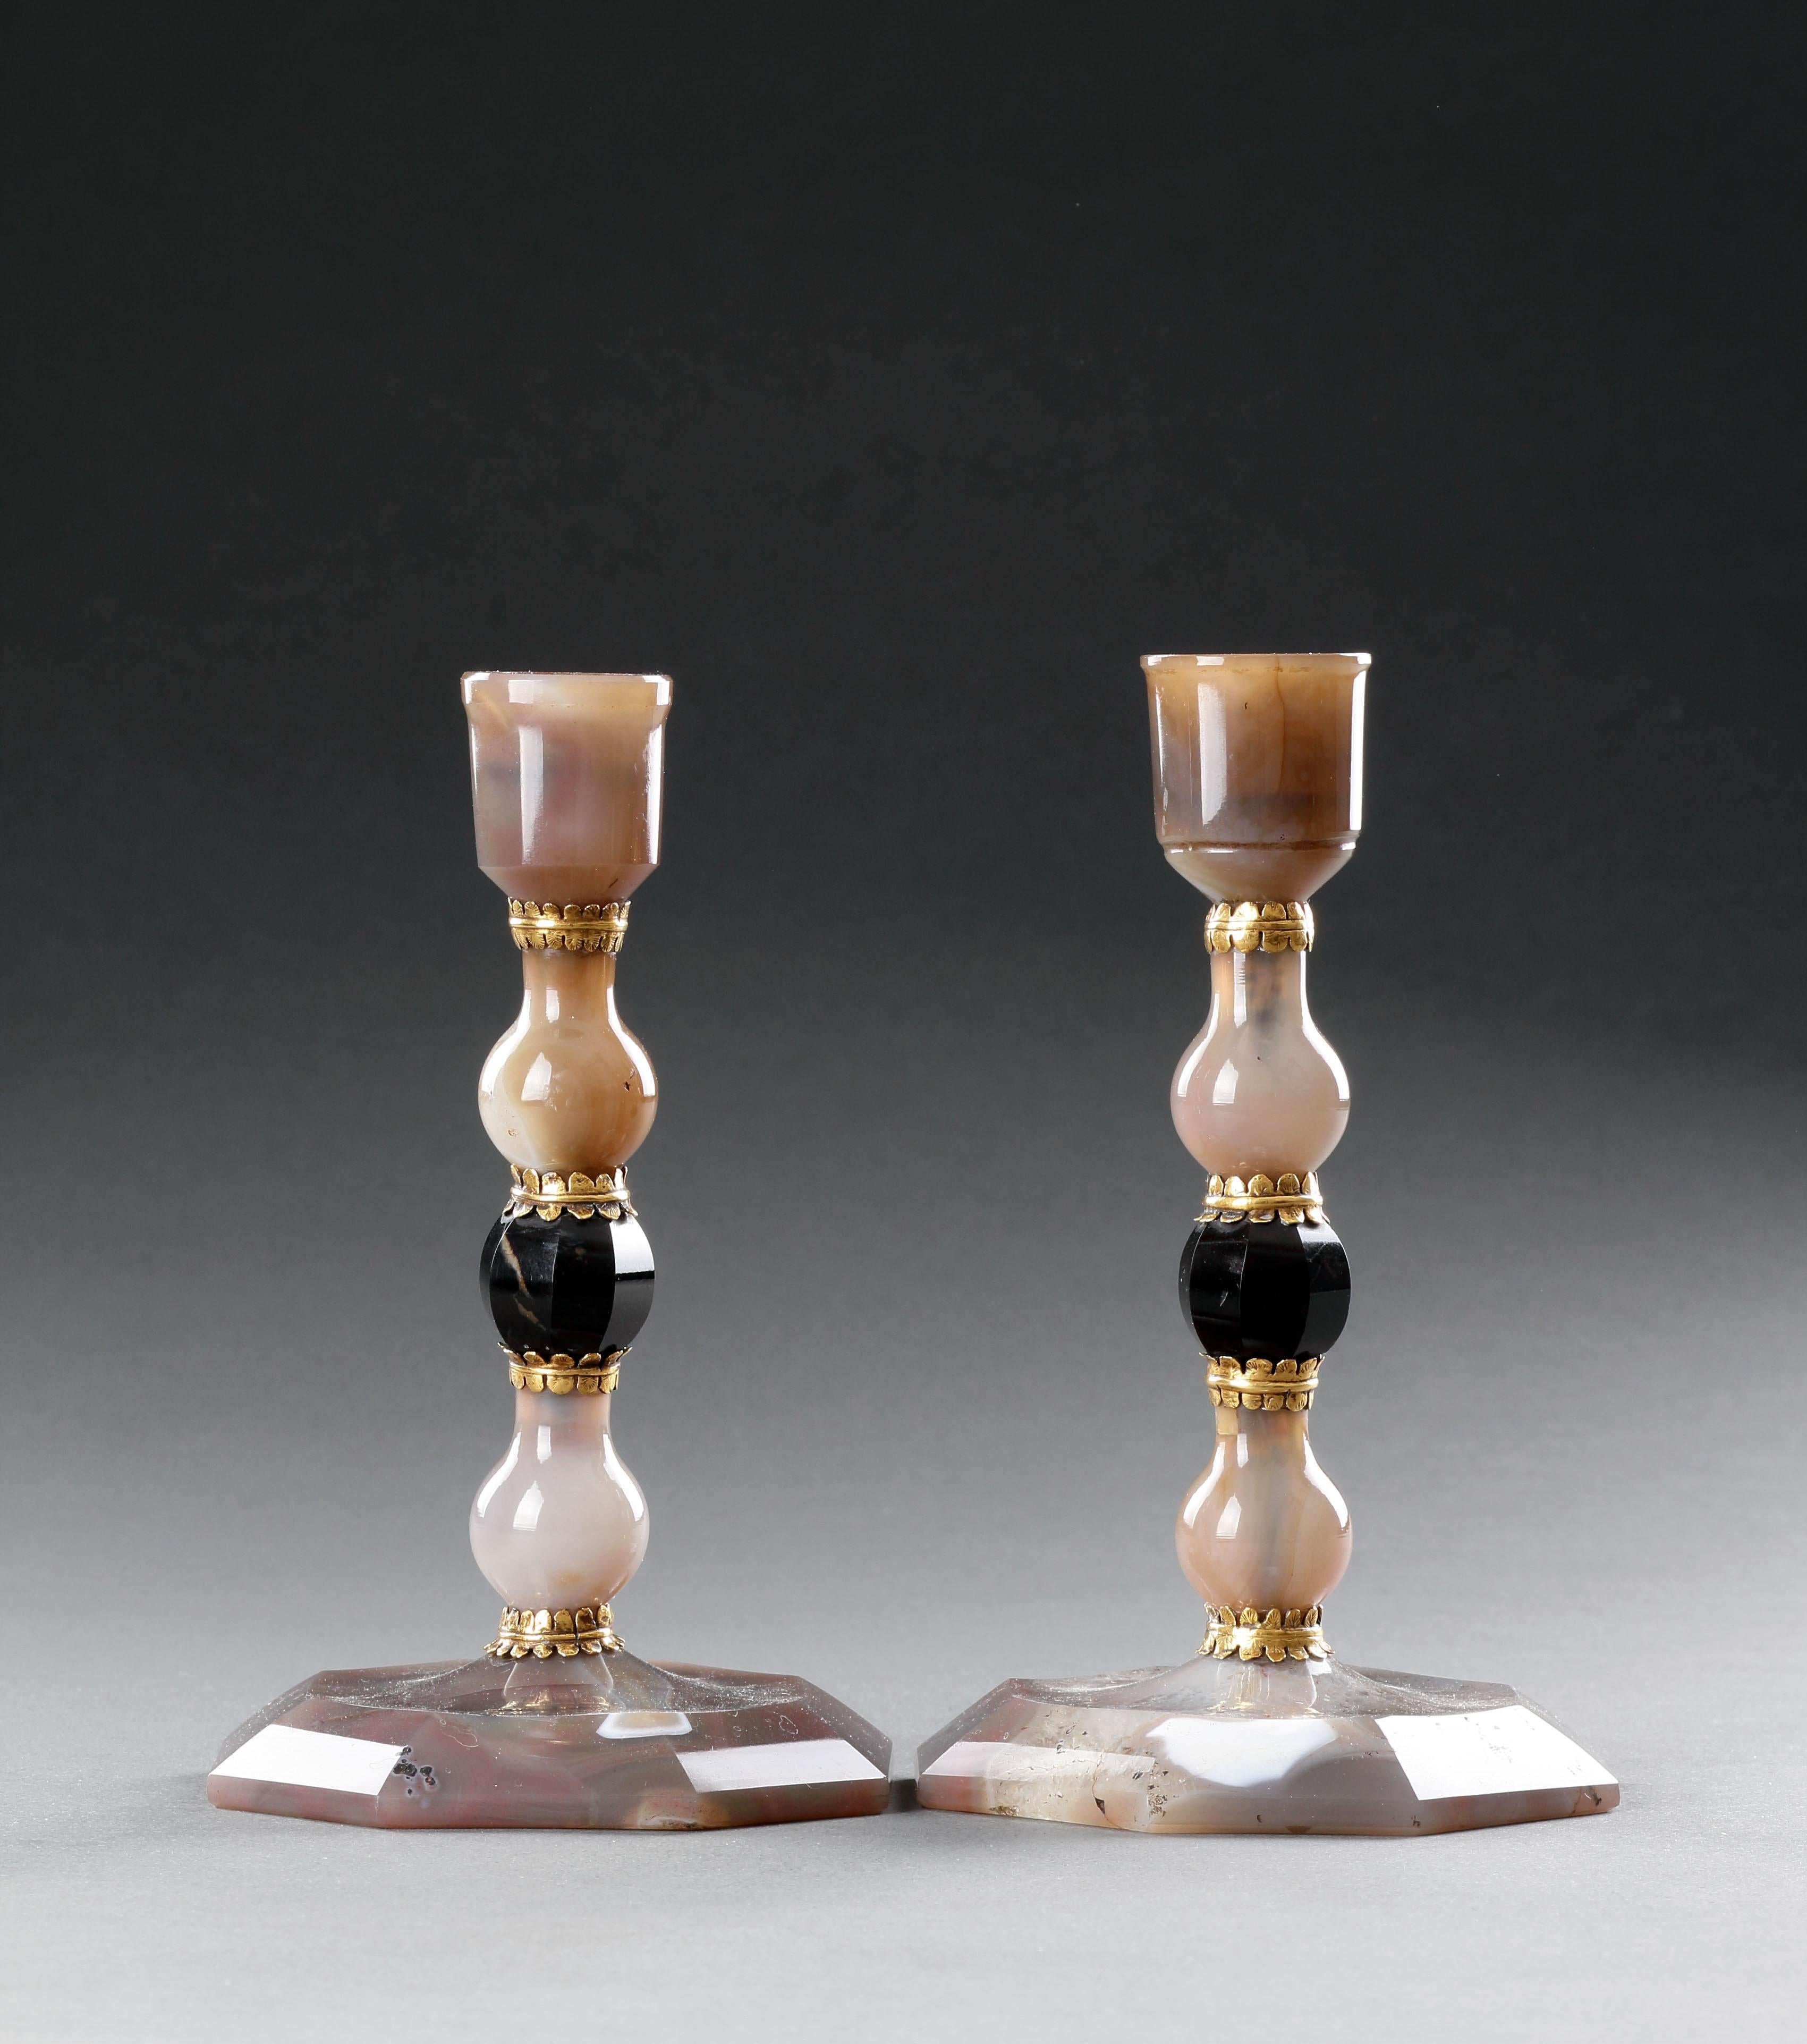 Two Fine ‘Kunstkammer’ Candlesticks
Agate, Glass, Fire-gilt Bronze mounts
Dresden, Germany

17th Century

Size: 16cm high - 6¼ ins high

Provenance:
Ex Kugel Galerie, Paris, France
Ex Peter Tillou collection 
Ex Private collection 